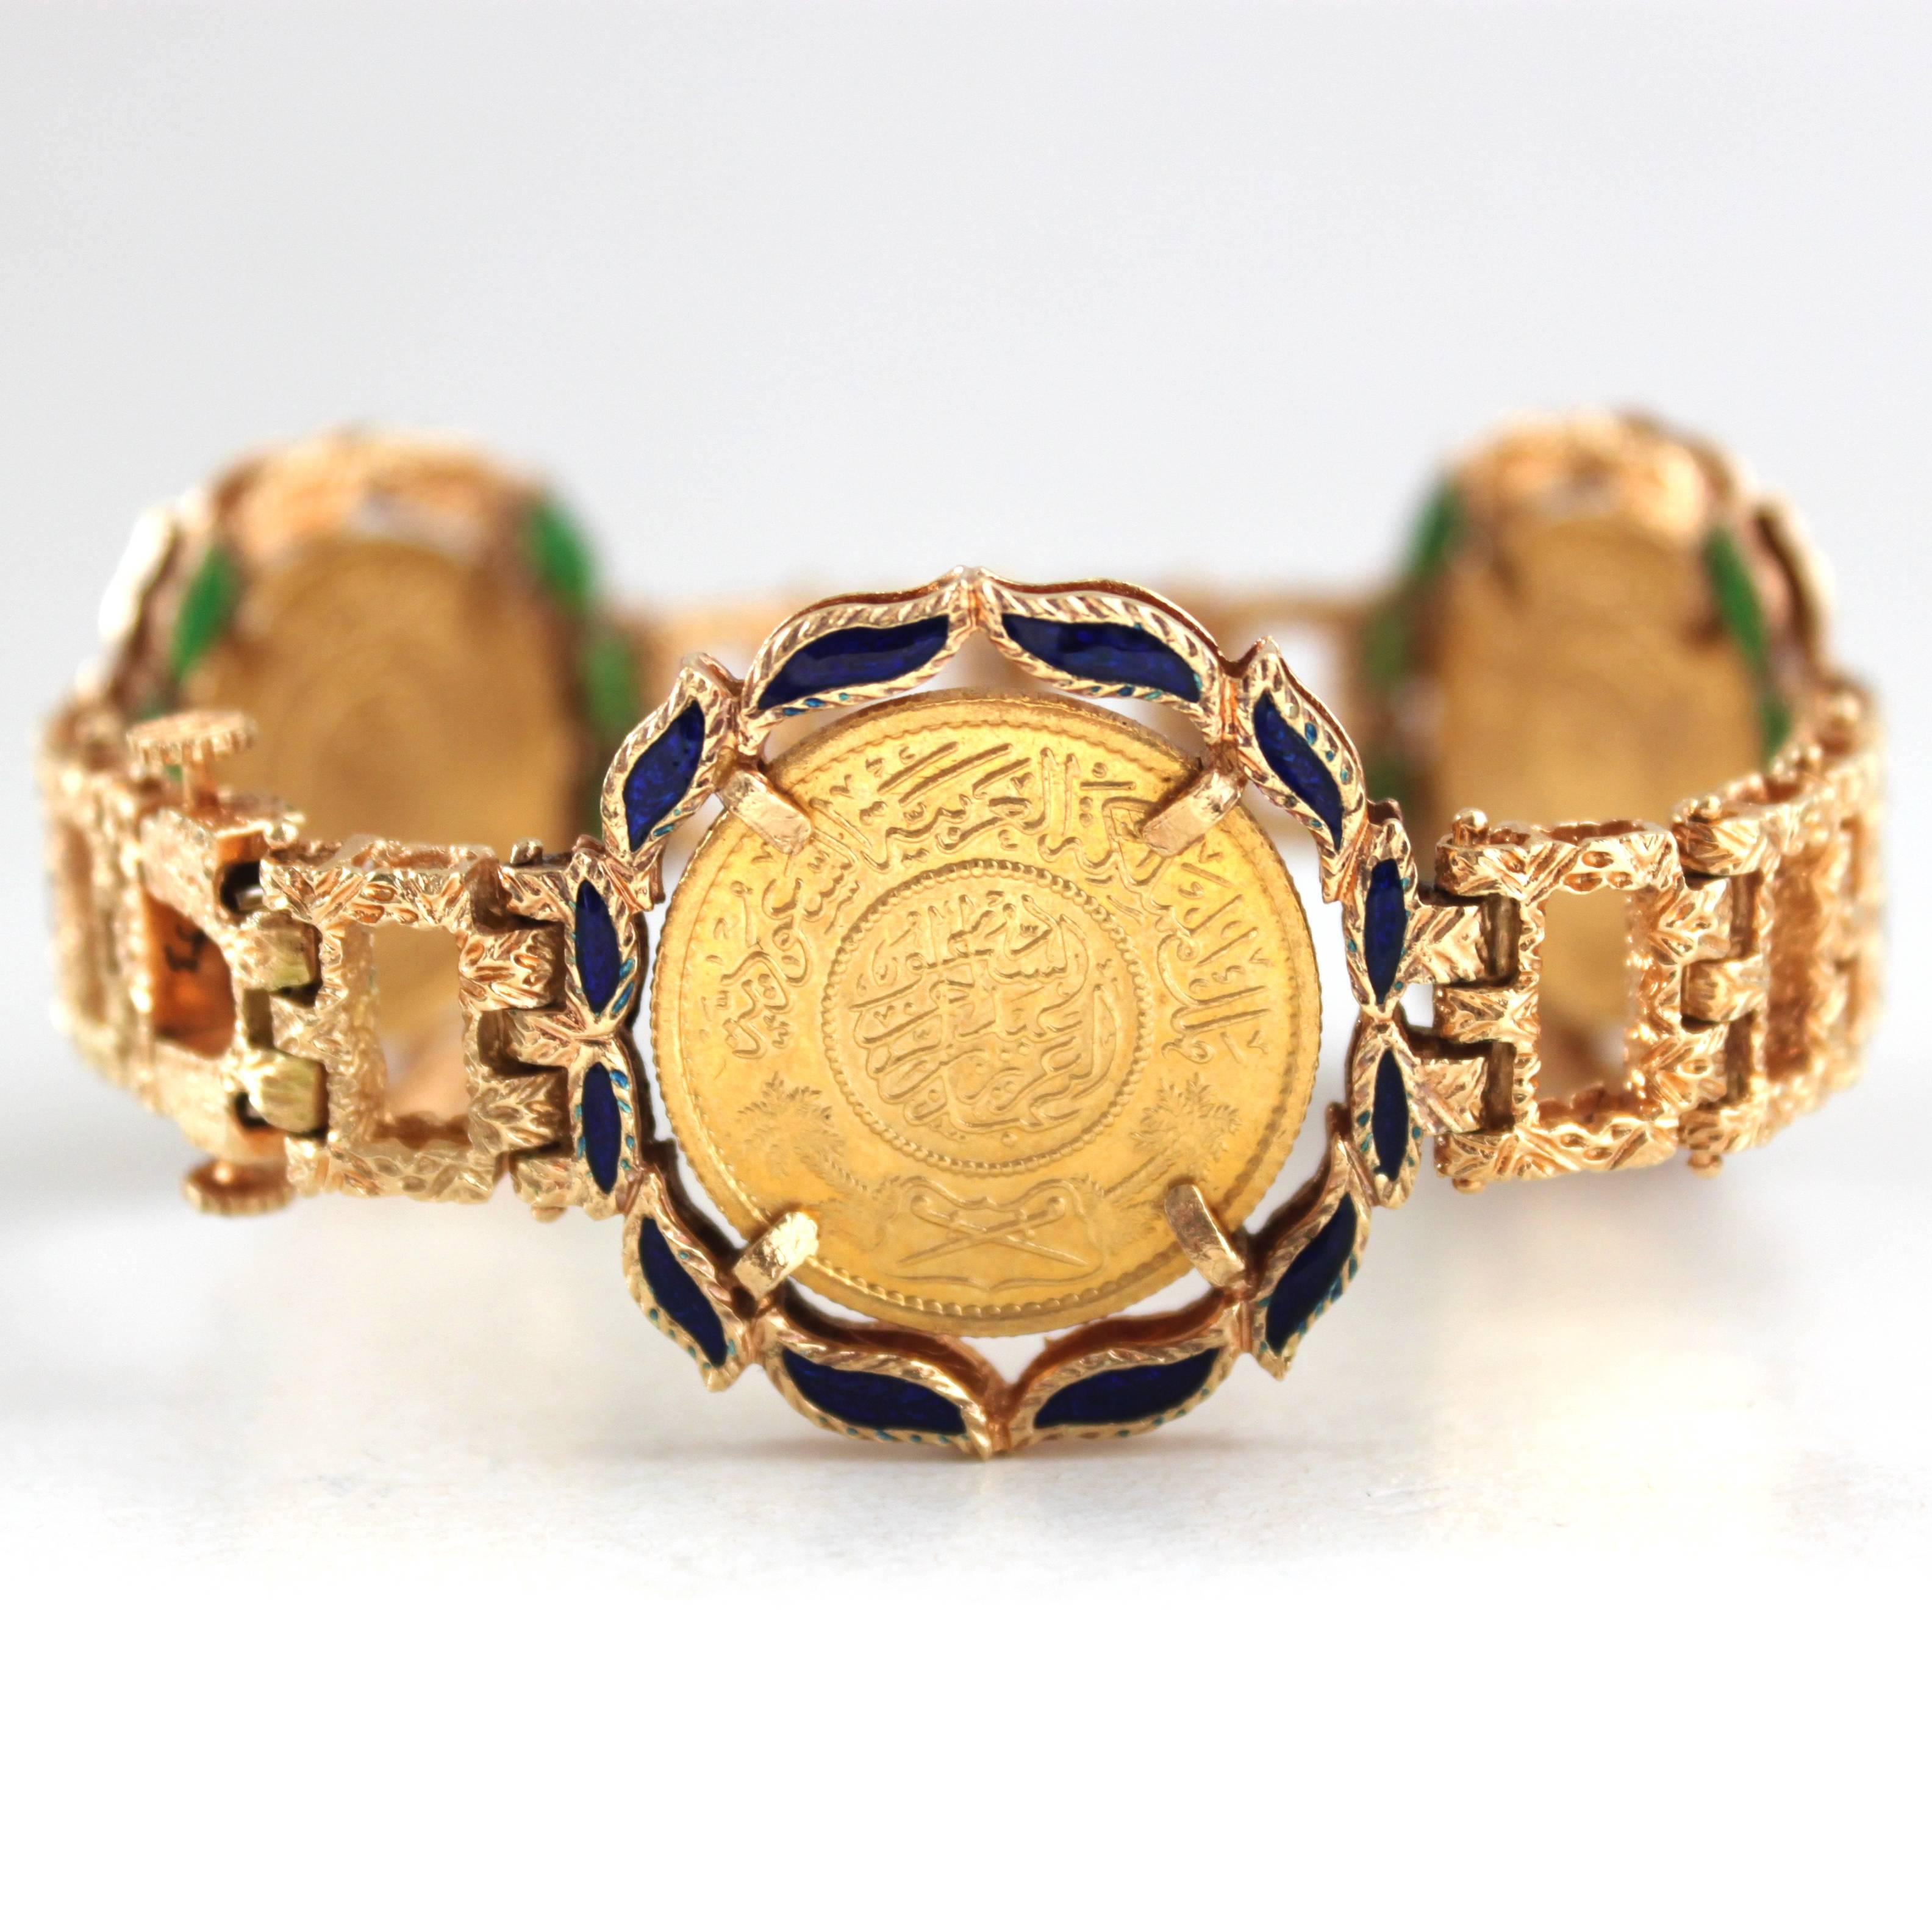 A beautiful and collectible 18k gold and enamel bracelet, with three 22k gold coins with Islamic scriptures, surrounded by blue and green enamelled leafs and completed by textured gold links. 

The clasp of the bracelet is reversible, so it can be